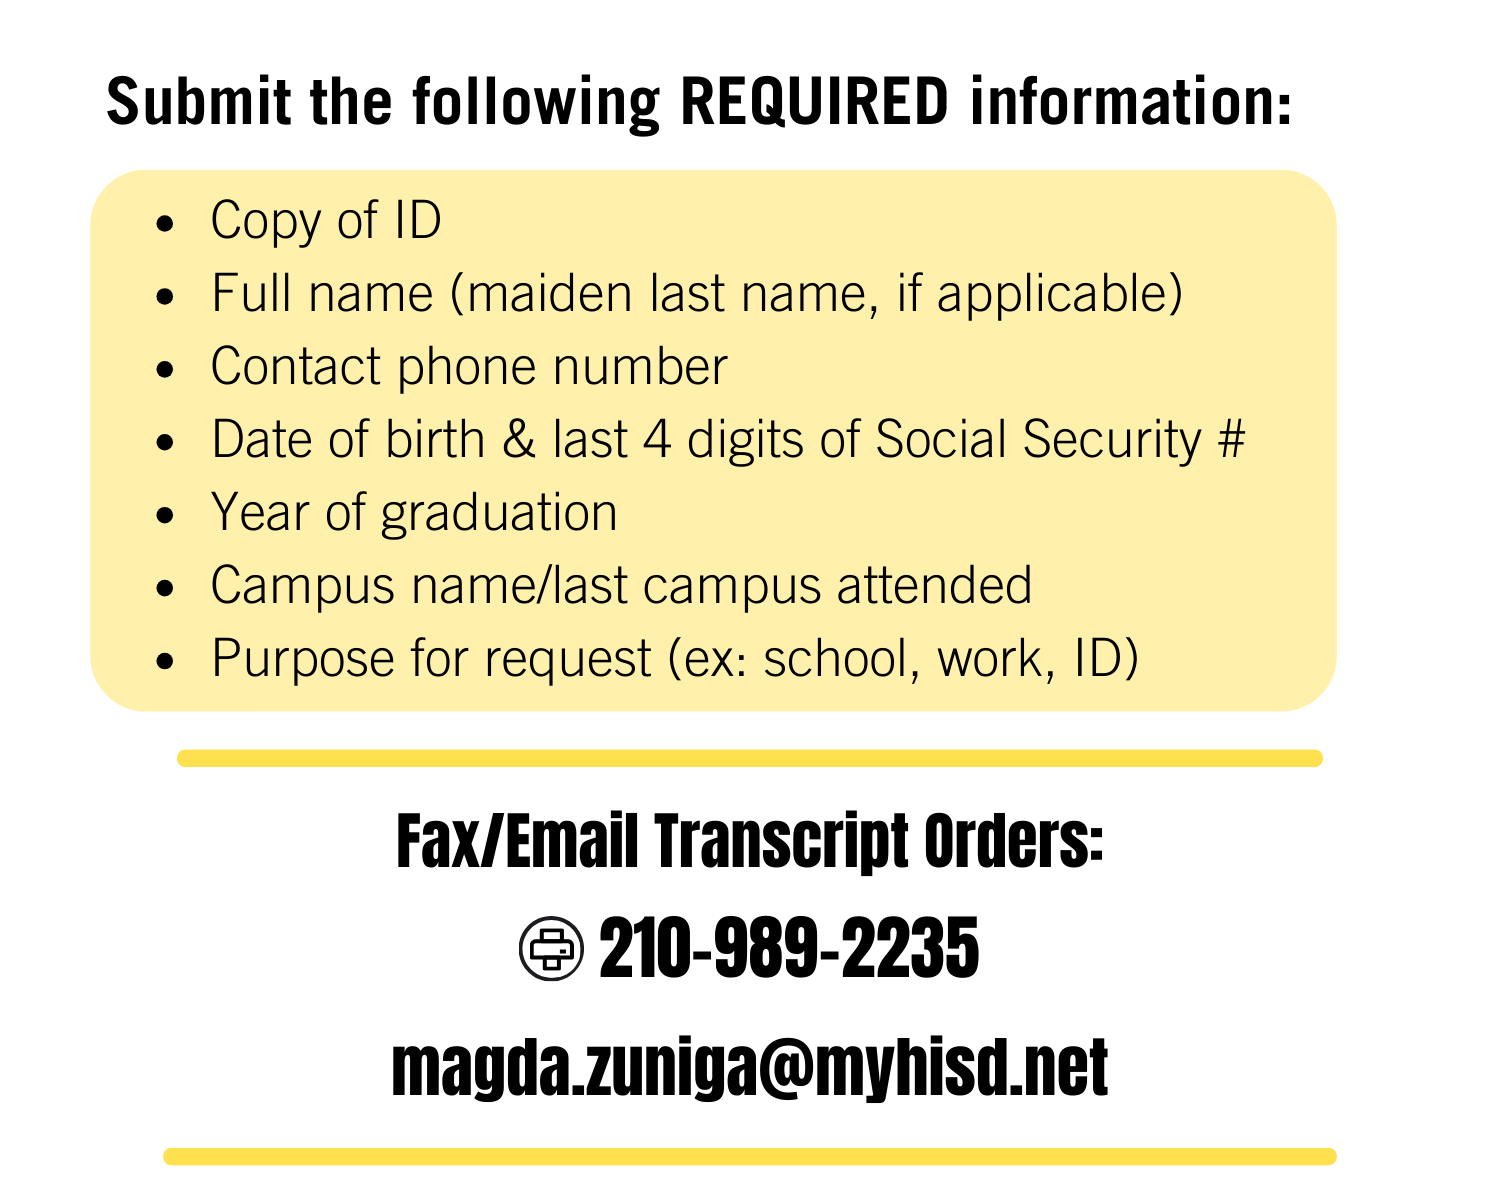 Provide the following with your transcript order:Copy of ID  Full name (maiden last name, if applicable) Contact phone number Date of birth & last 4 digits of Social Security # Year of graduation & campus name Purpose for request (ex: school, work, ID) Fax/Email Transcript Orders: FAX:210-989-4445 EMAIL:magda.zuniga@myhisd.net